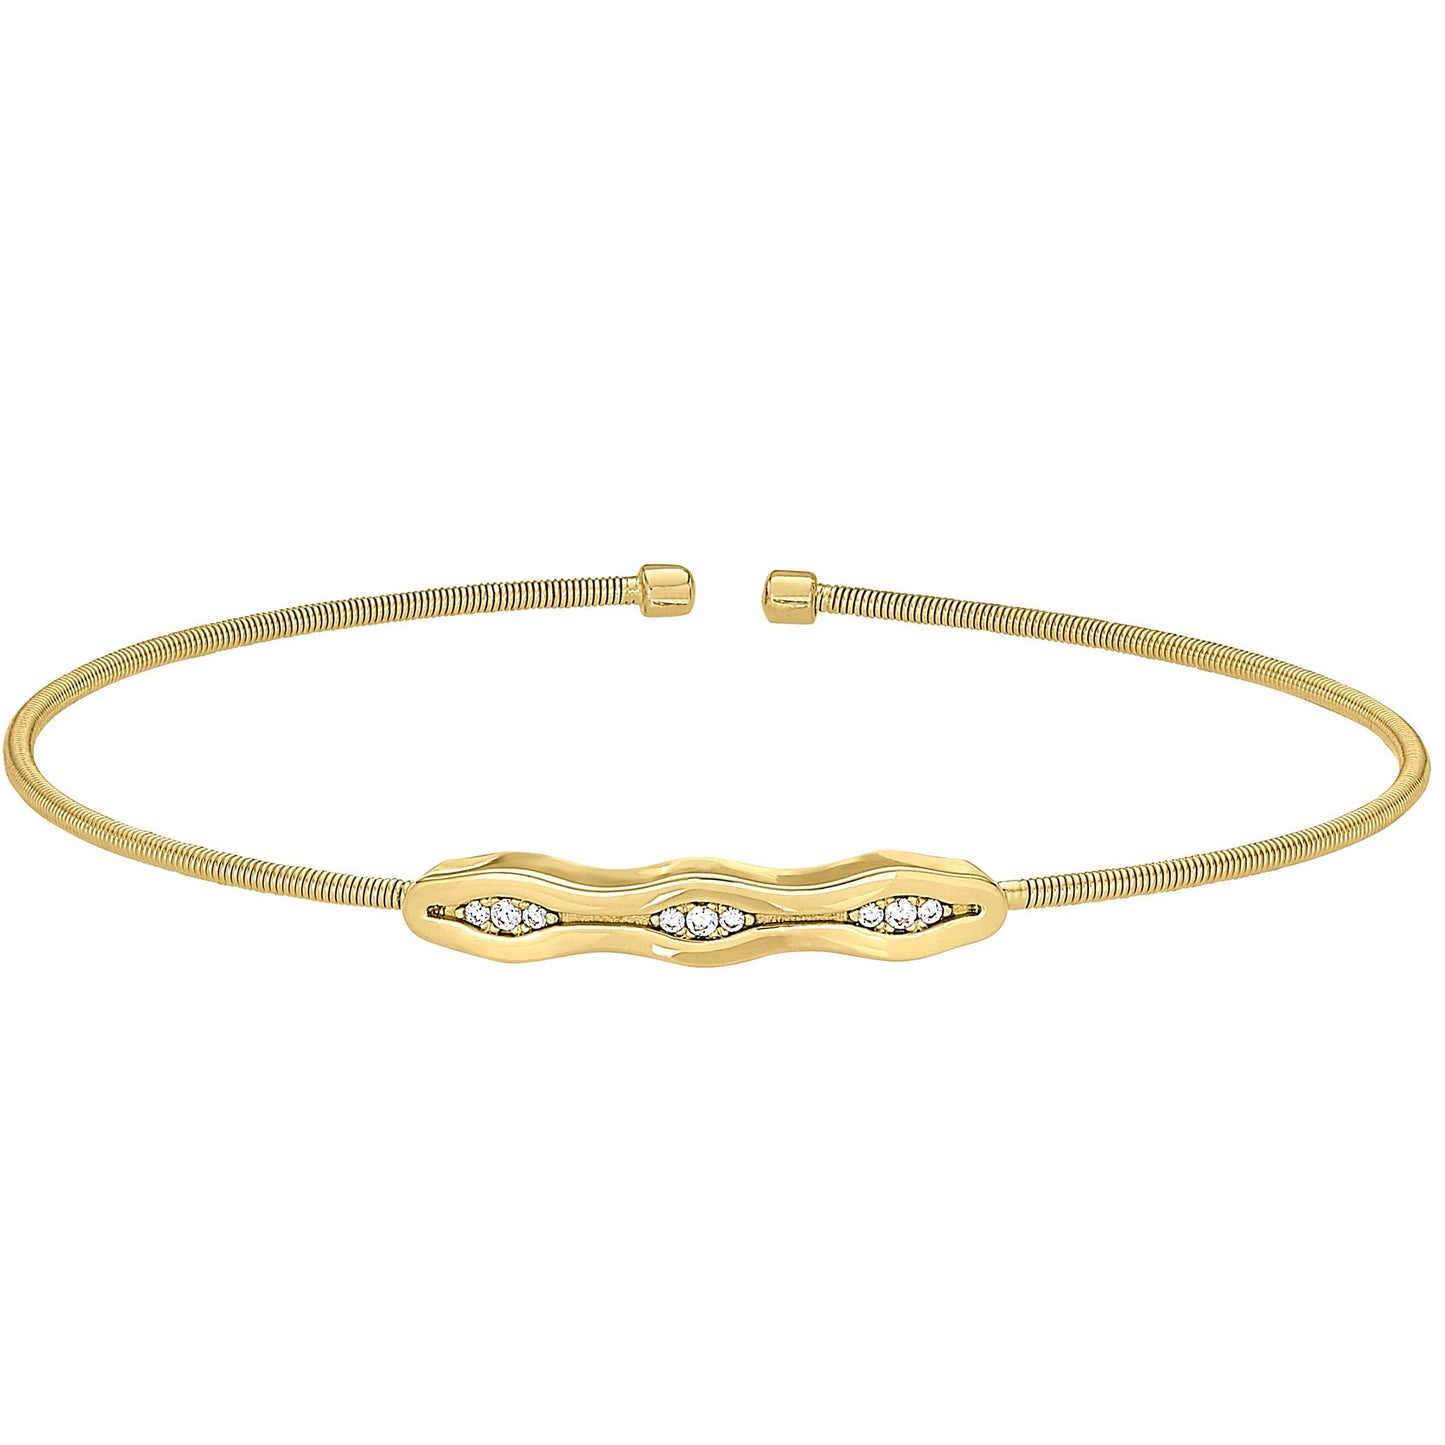 A geometric pattern flexible cable bracelet with simulated diamonds displayed on a neutral white background.